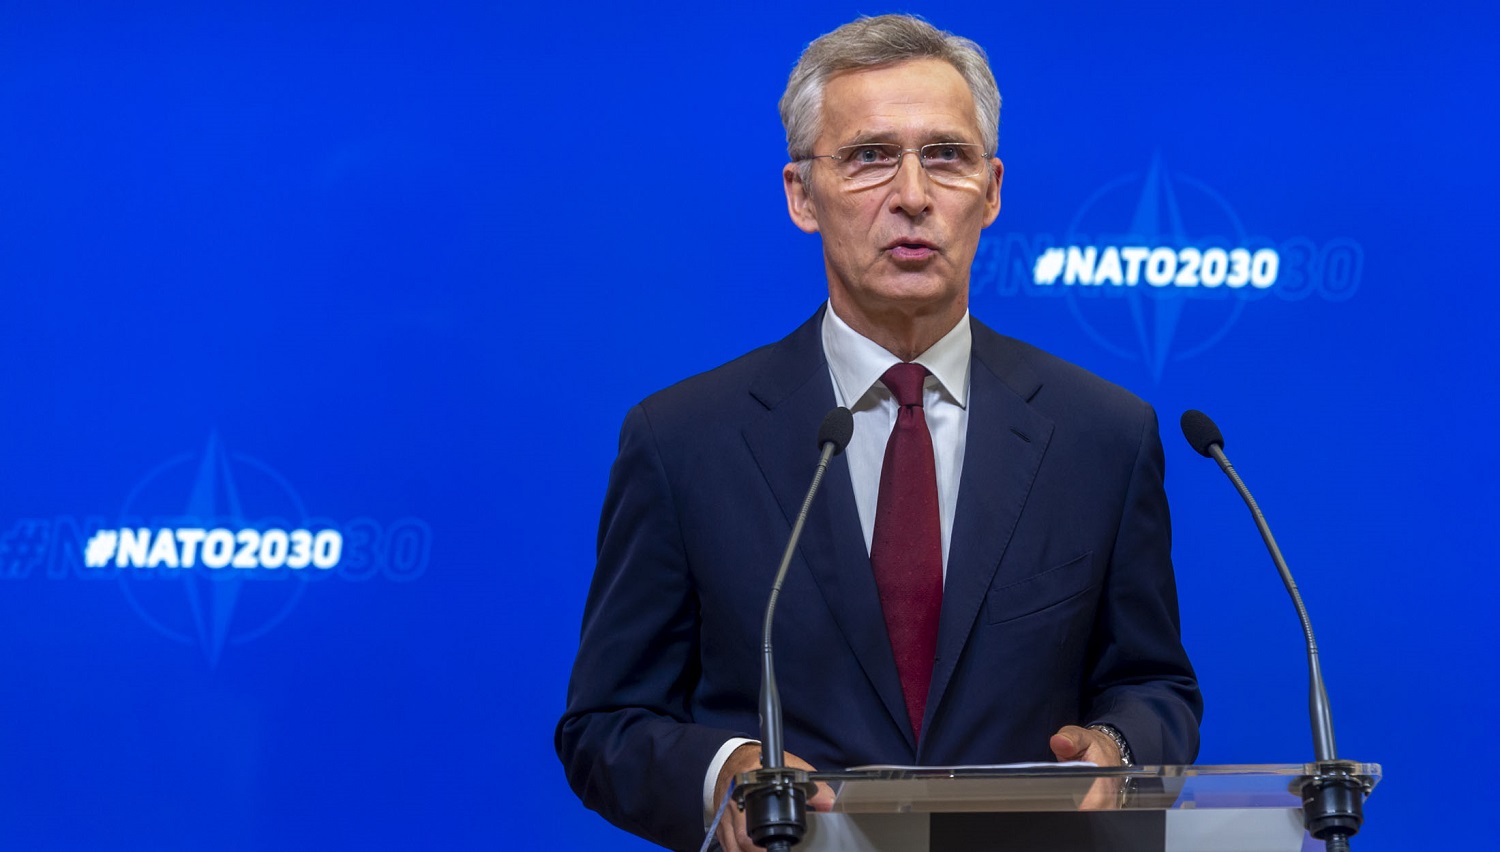 Secretary General Urges NATO Unity Amid Challenges from China and Russia